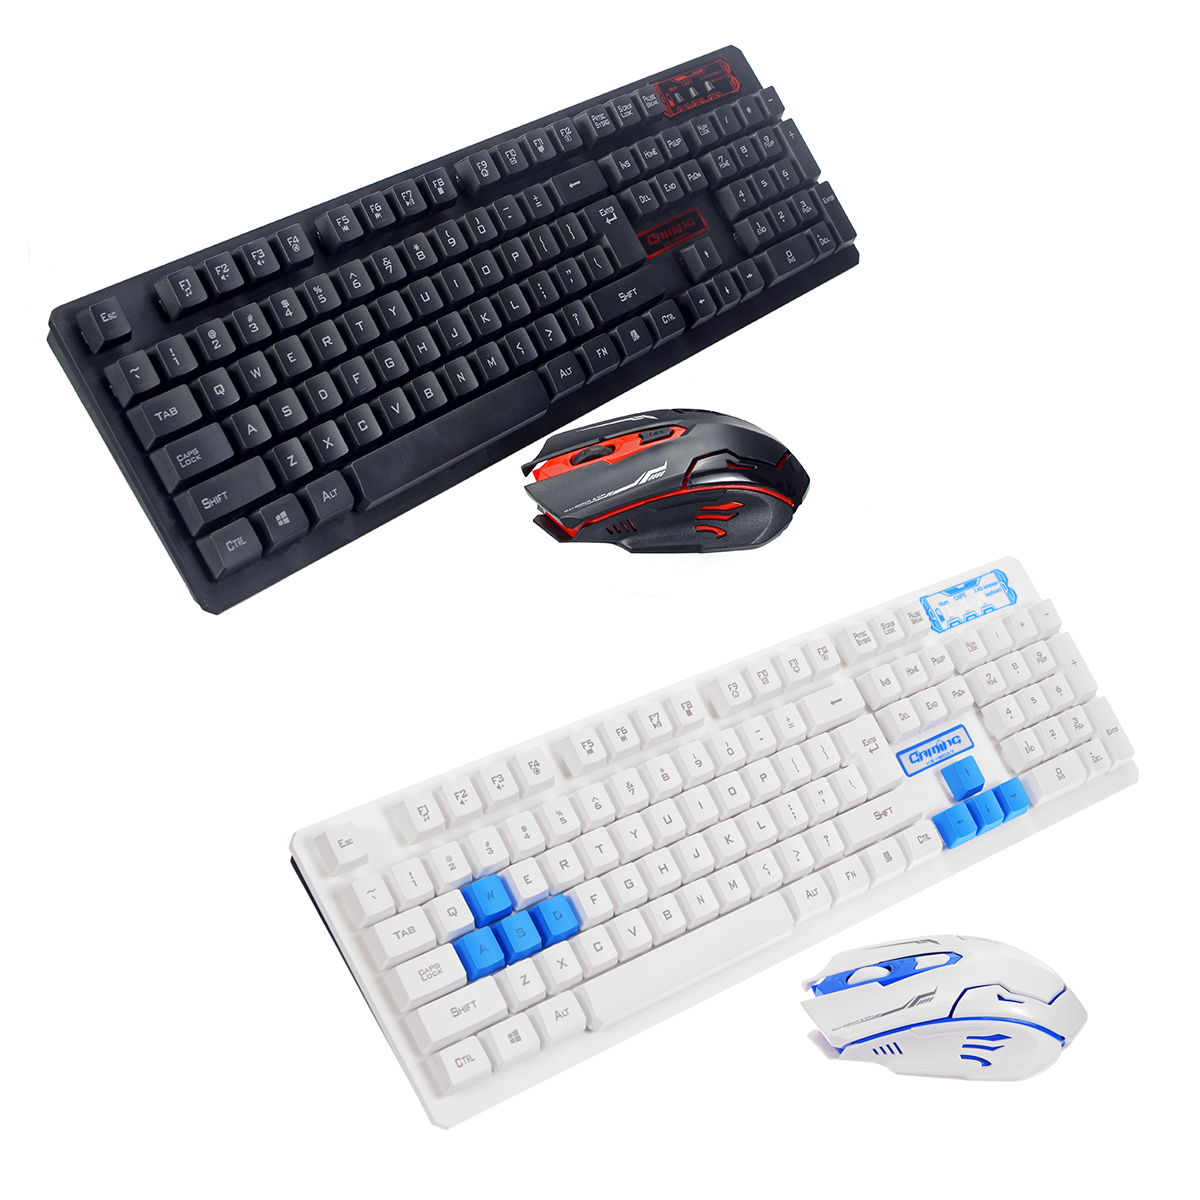 

HK6500 2.4GHZ Wireless Suspension Keycap Keyboard and 1600DPI Wireless 4D Button Gaming Mouse Combo for Office PC and La